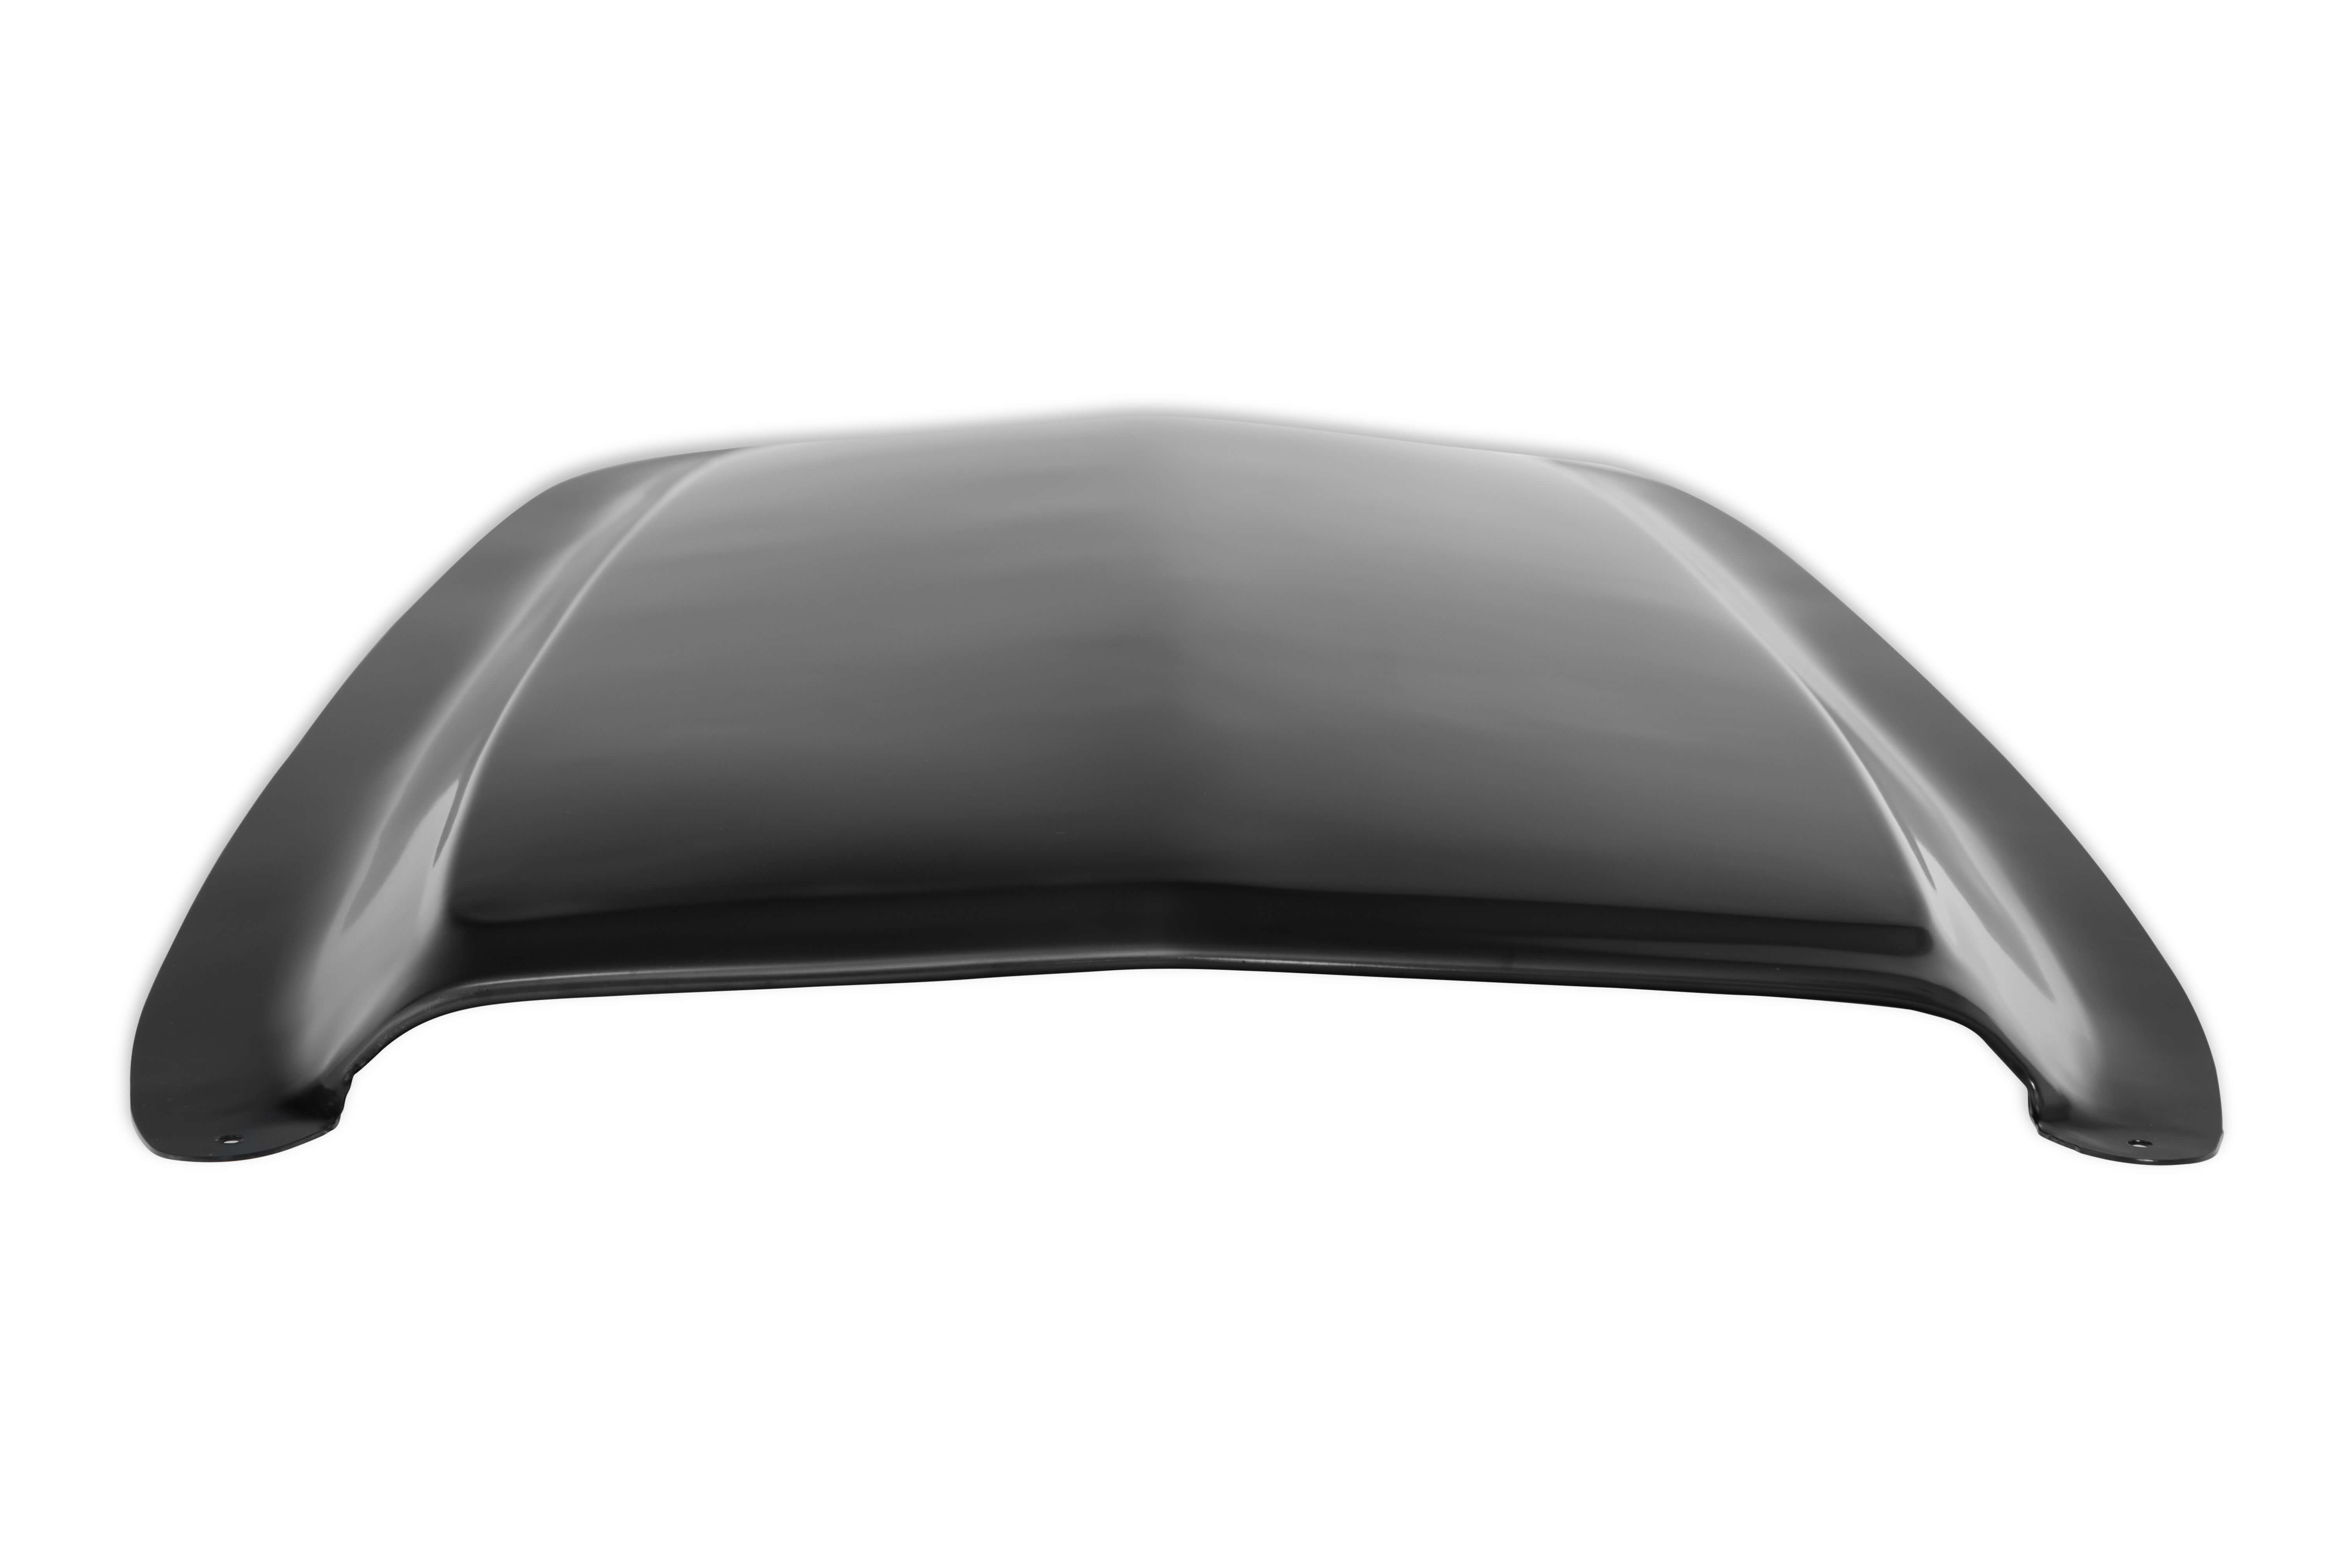 Compatible with 1965-1966 Ford Shelby Mustang GT350 Scott Drake Fiberglass Bolt-On Hood Scoop in a Semi-Gloss Gray Finish Model S1MS-16025-B 